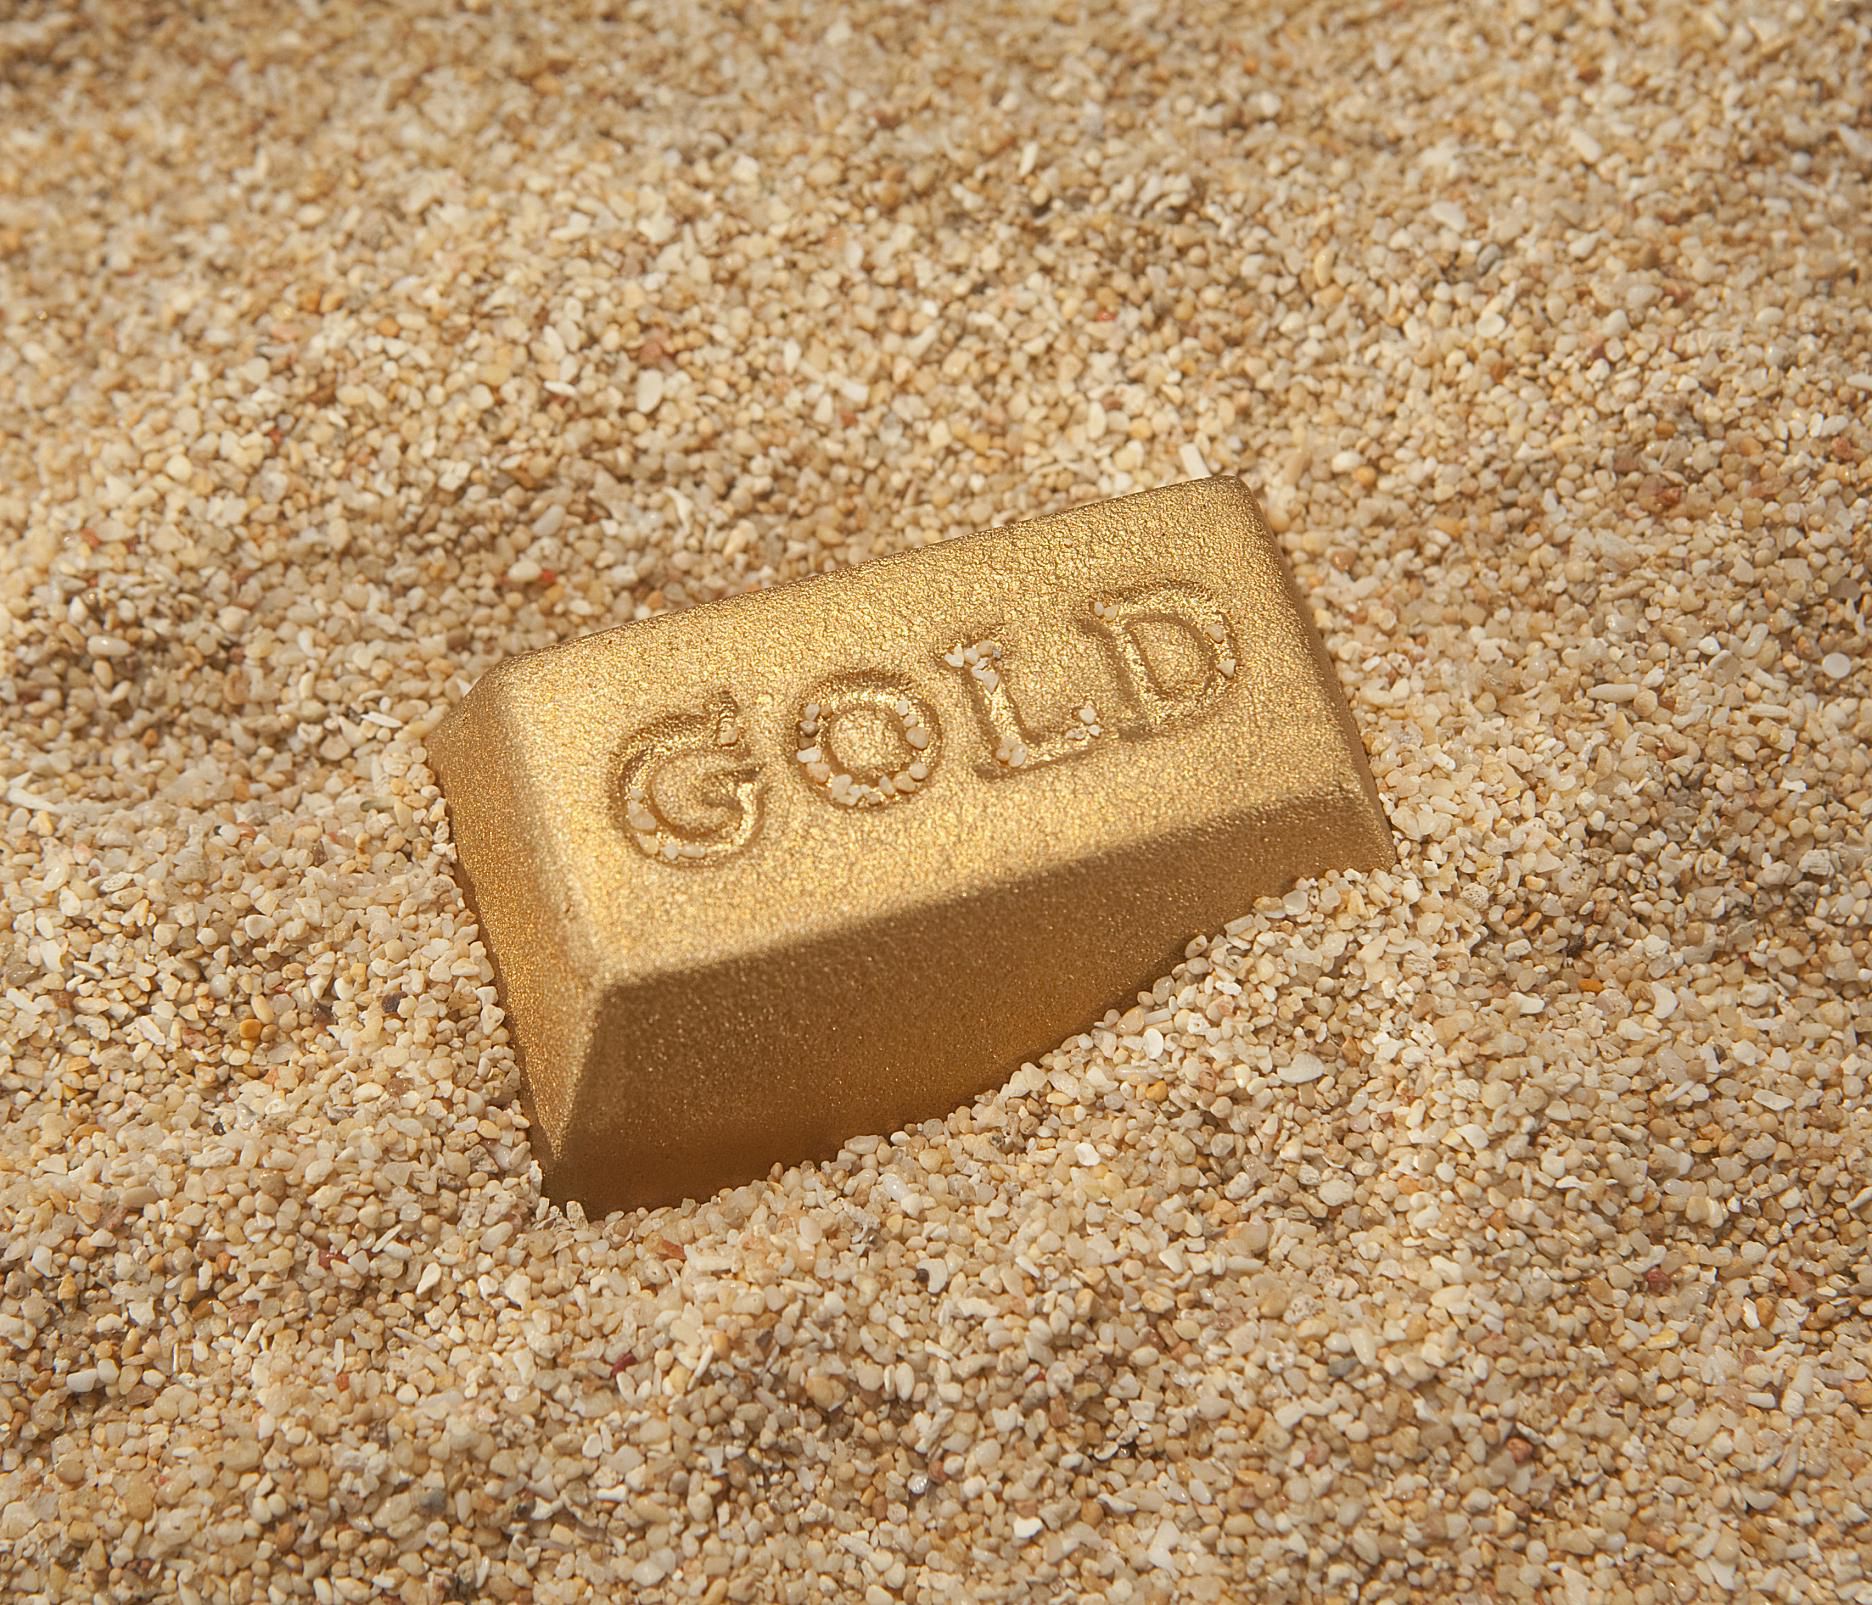 Is Gold a Good Investment For Retirement?